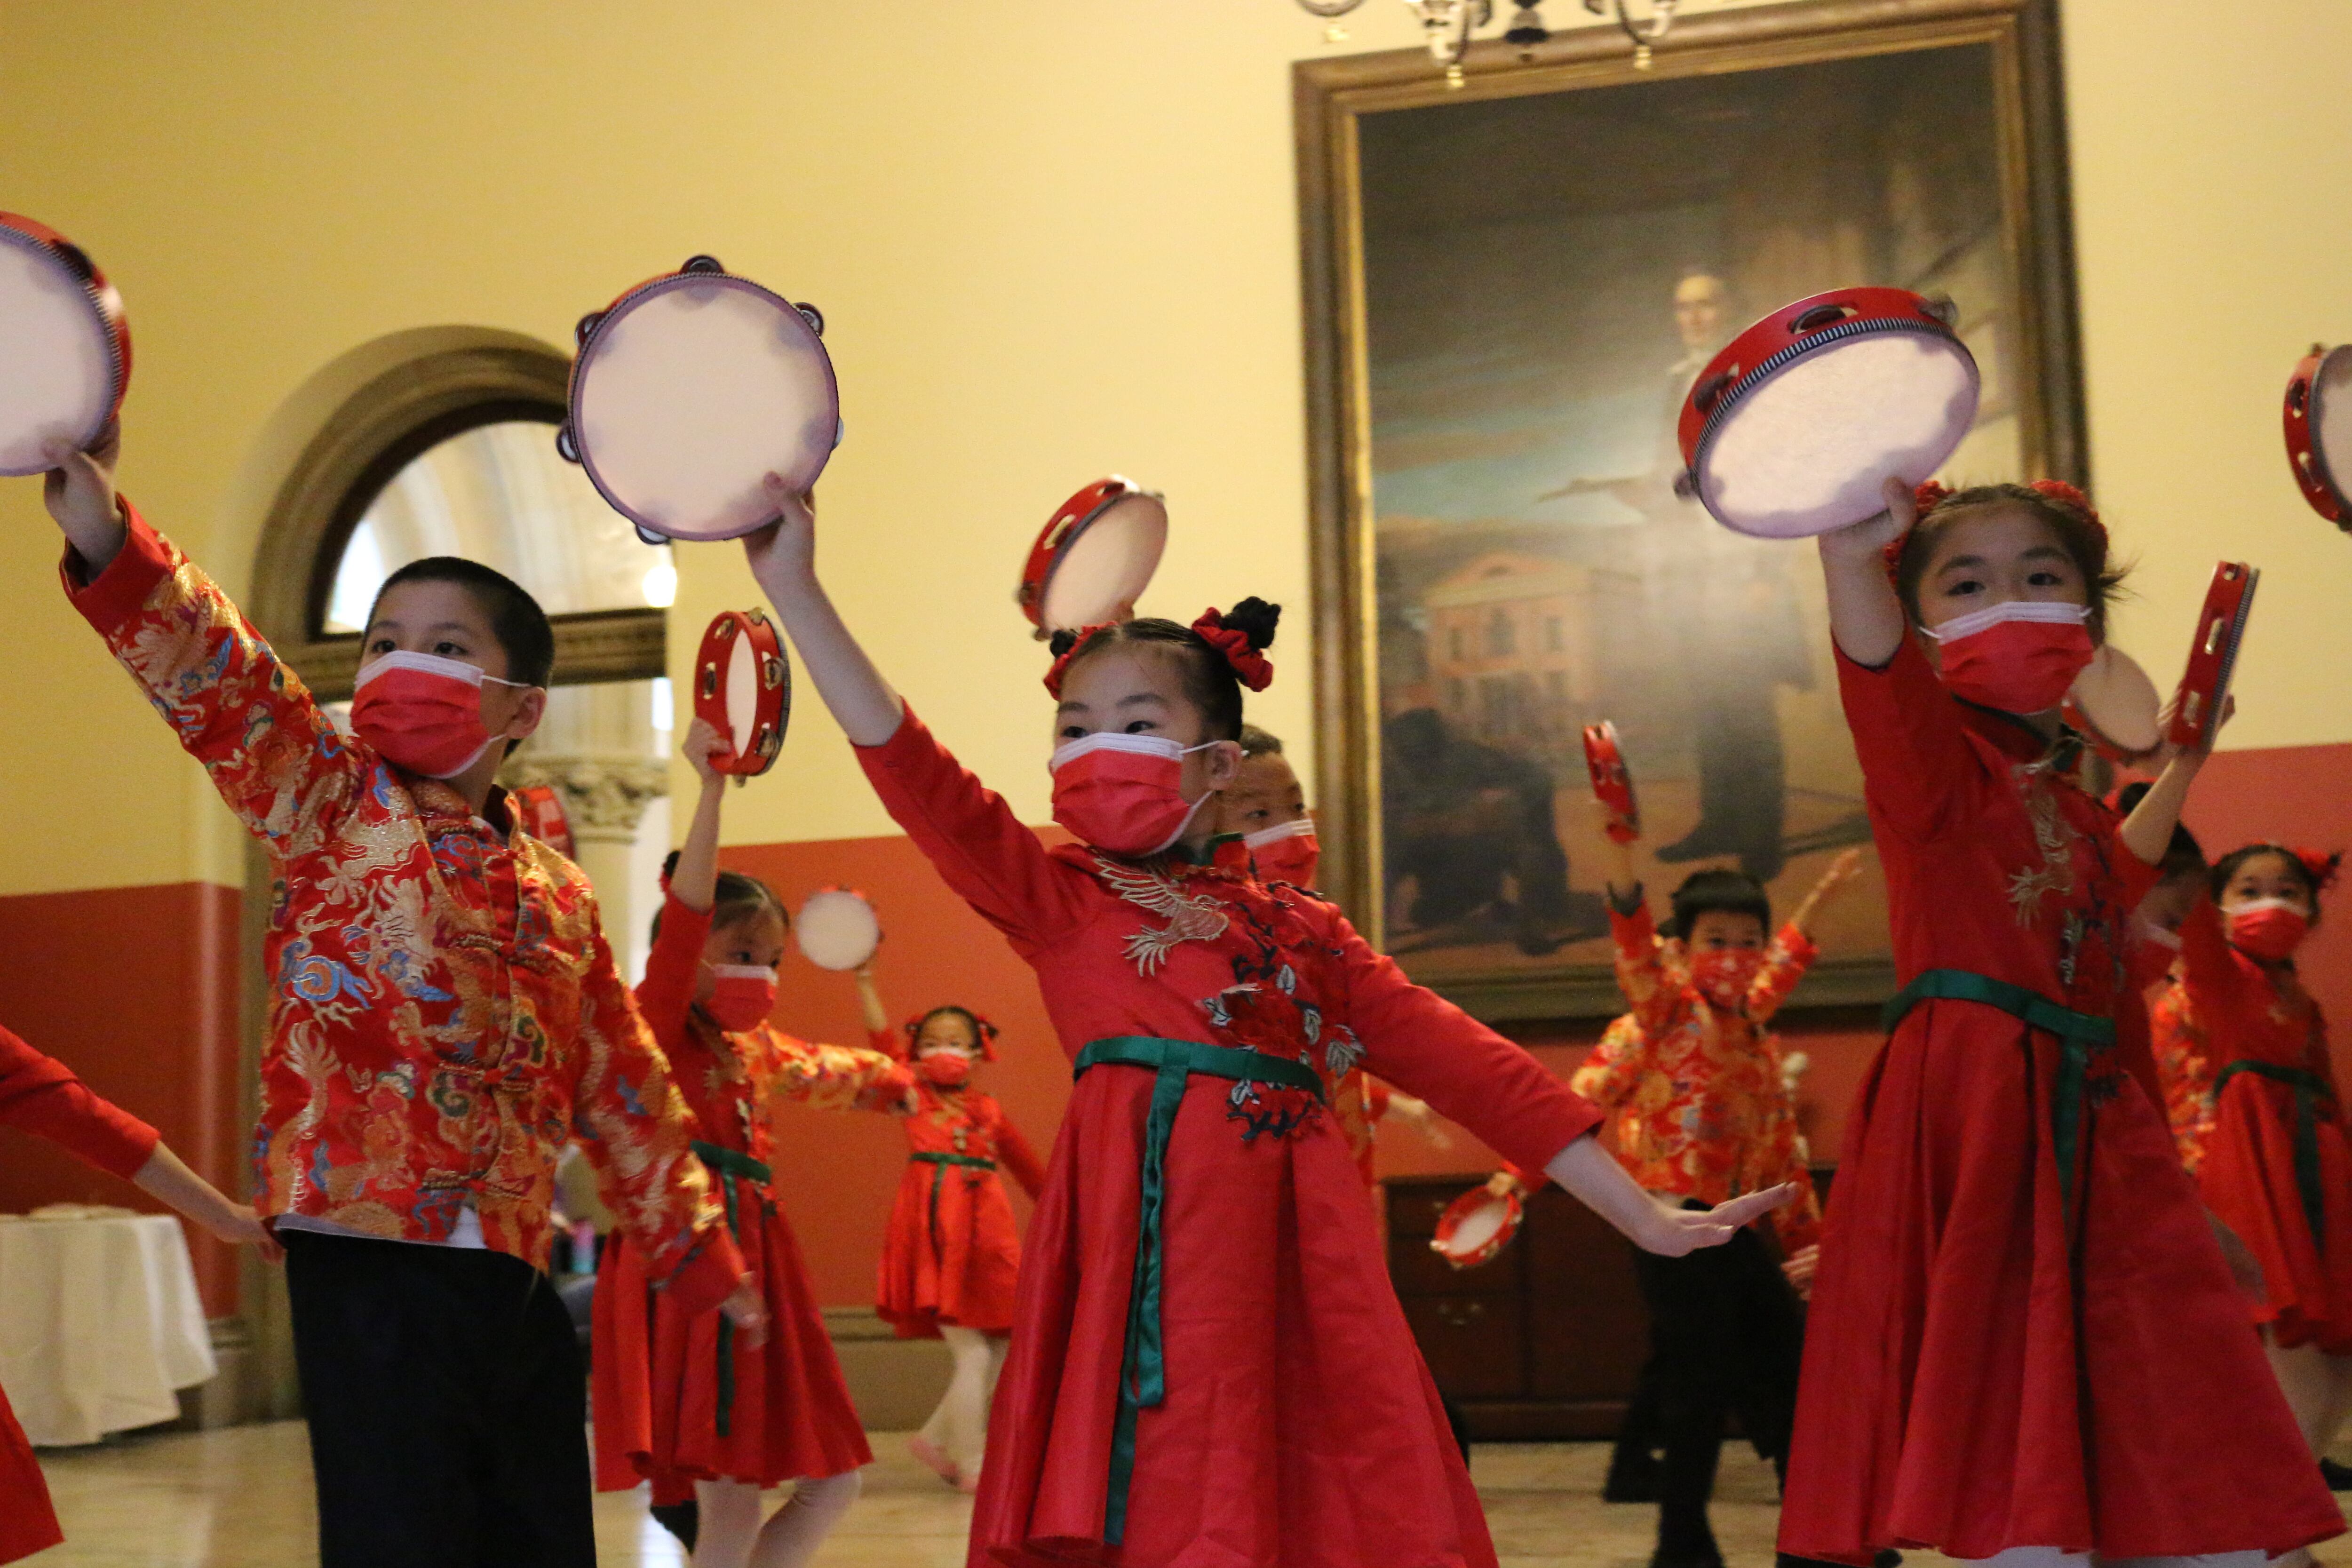 Students in red costumes and masks hold tambourines in the air.